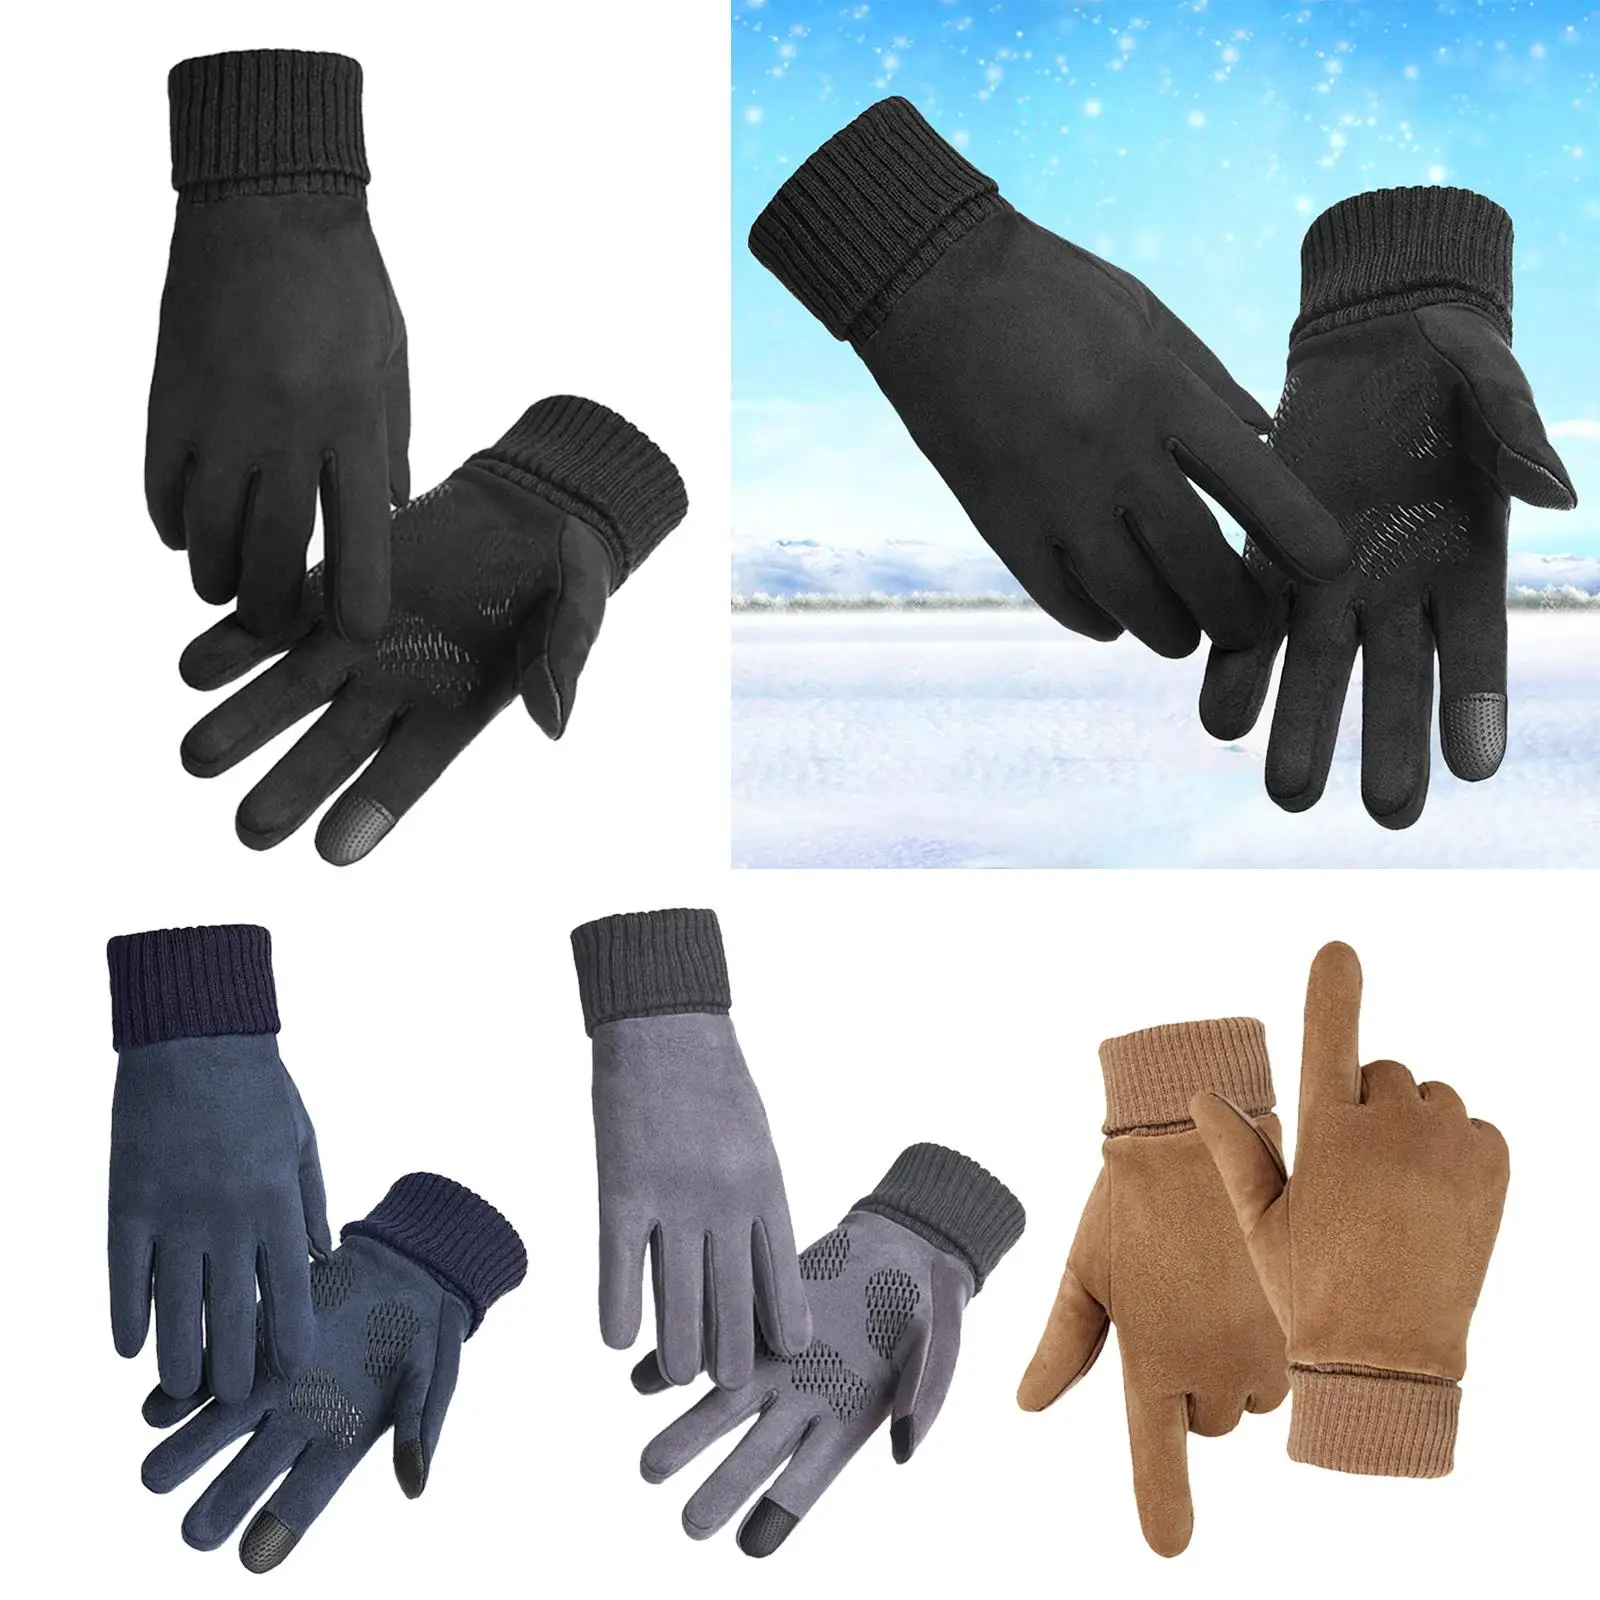 Winter Warm Gloves Full Finger Comfortable Lightweight Thermal Cycling Gloves for Men Hiking Skiing Outdoor Activities Running